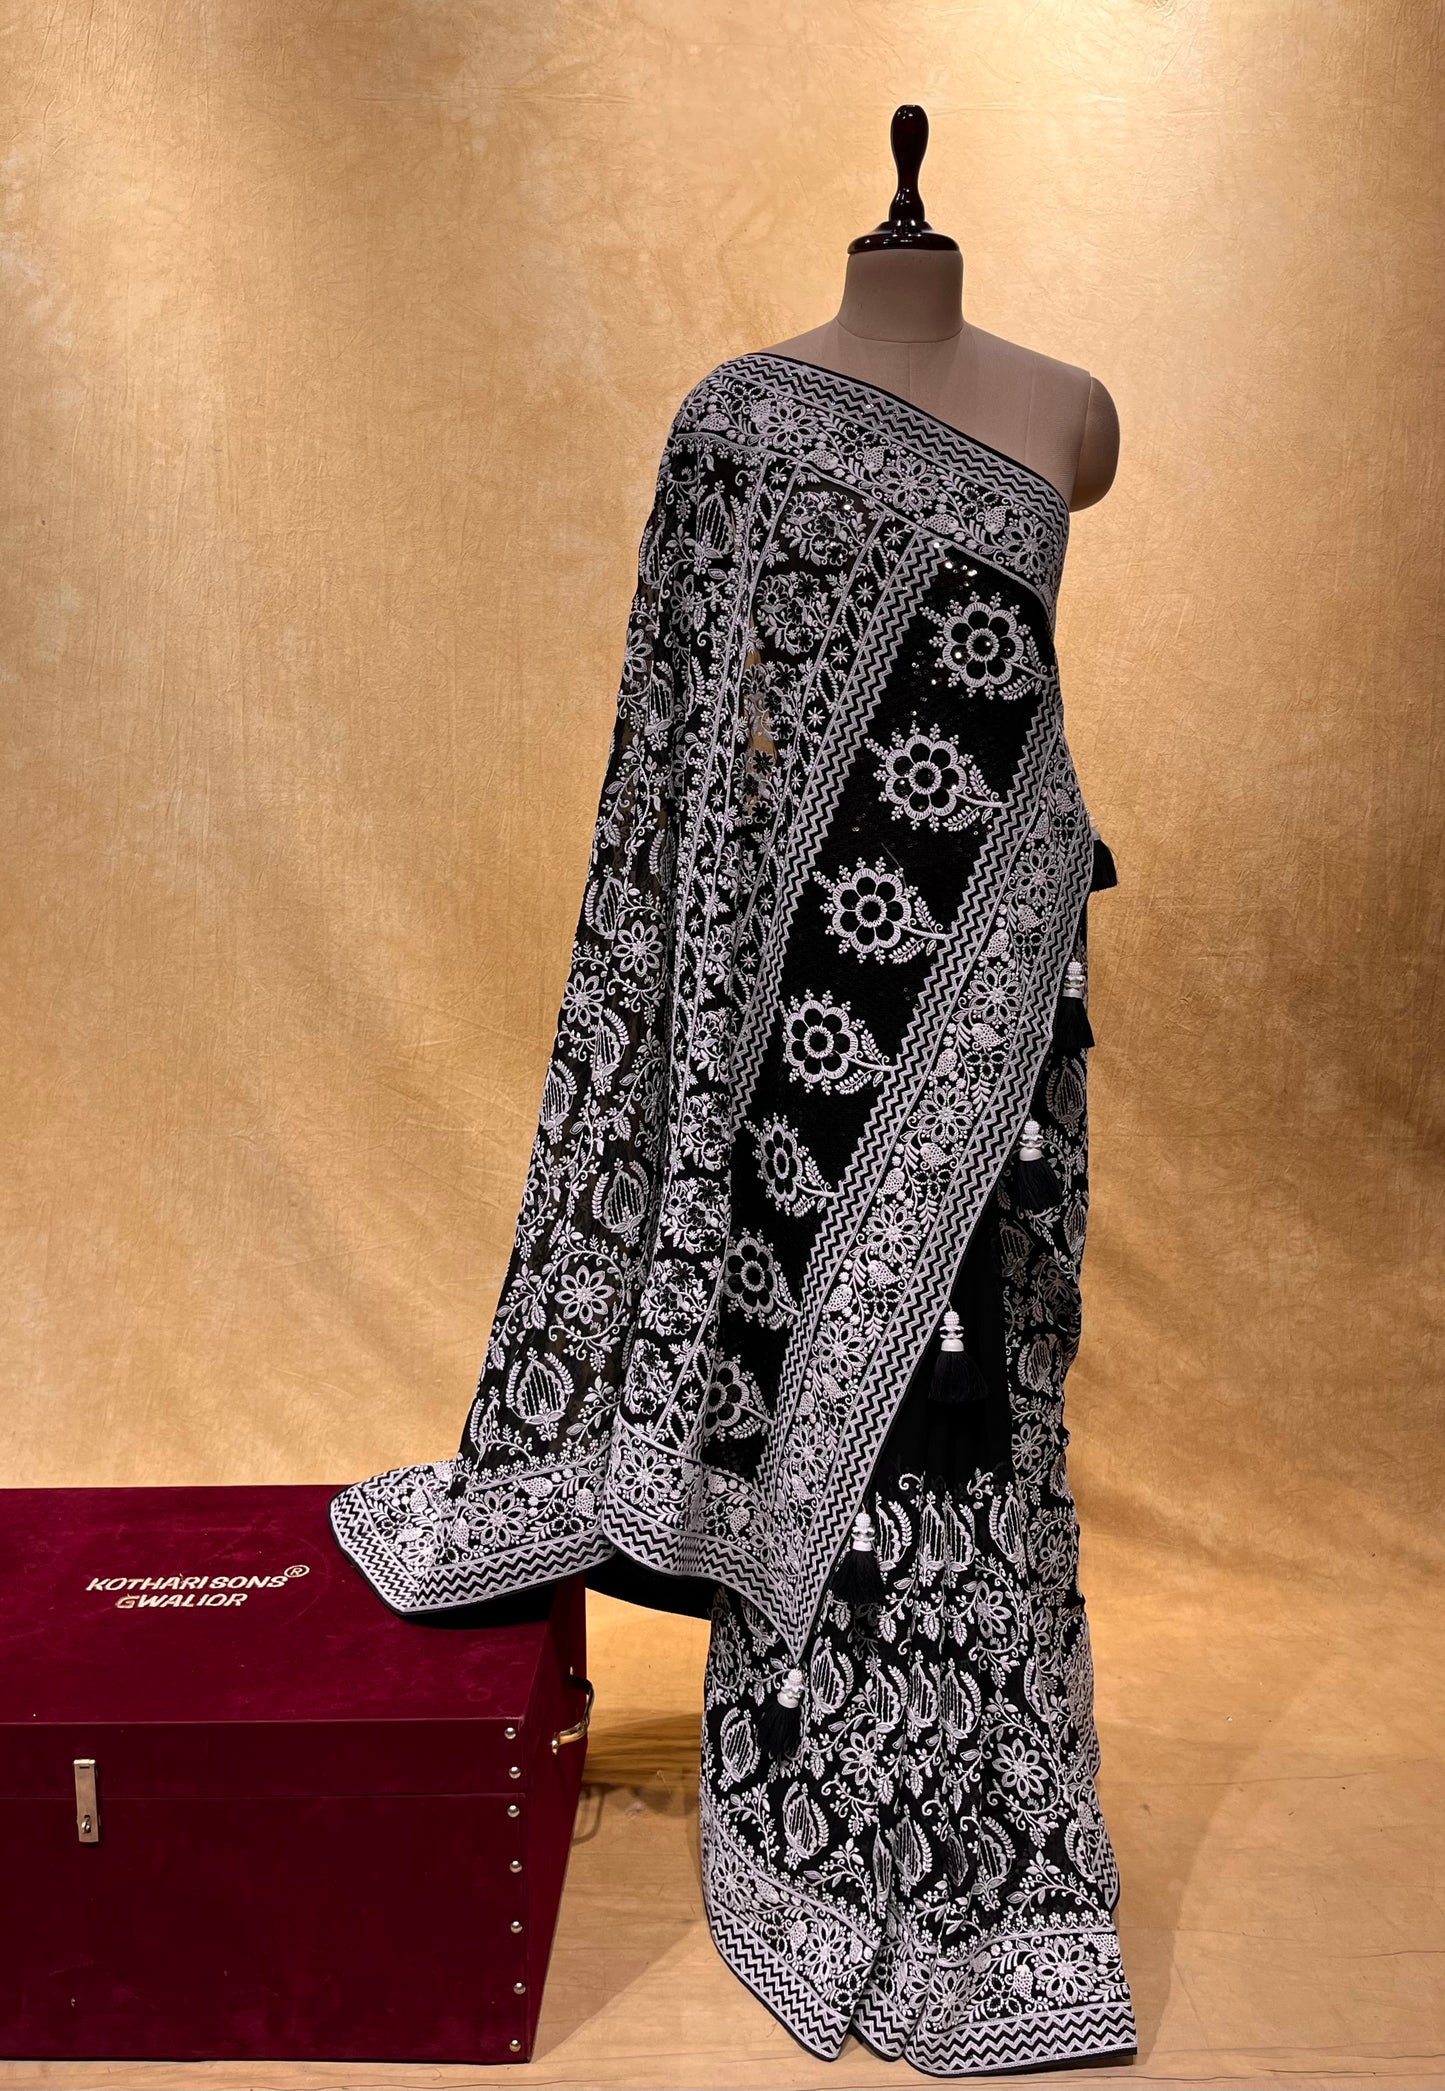 BLACK COLOR GEORGETTE CHIKENKARI EMBROIDERED SAREE EMBELLISHED WITH SEQUINS & THREAD WORK ( BLACK CHIKAN SAREE )